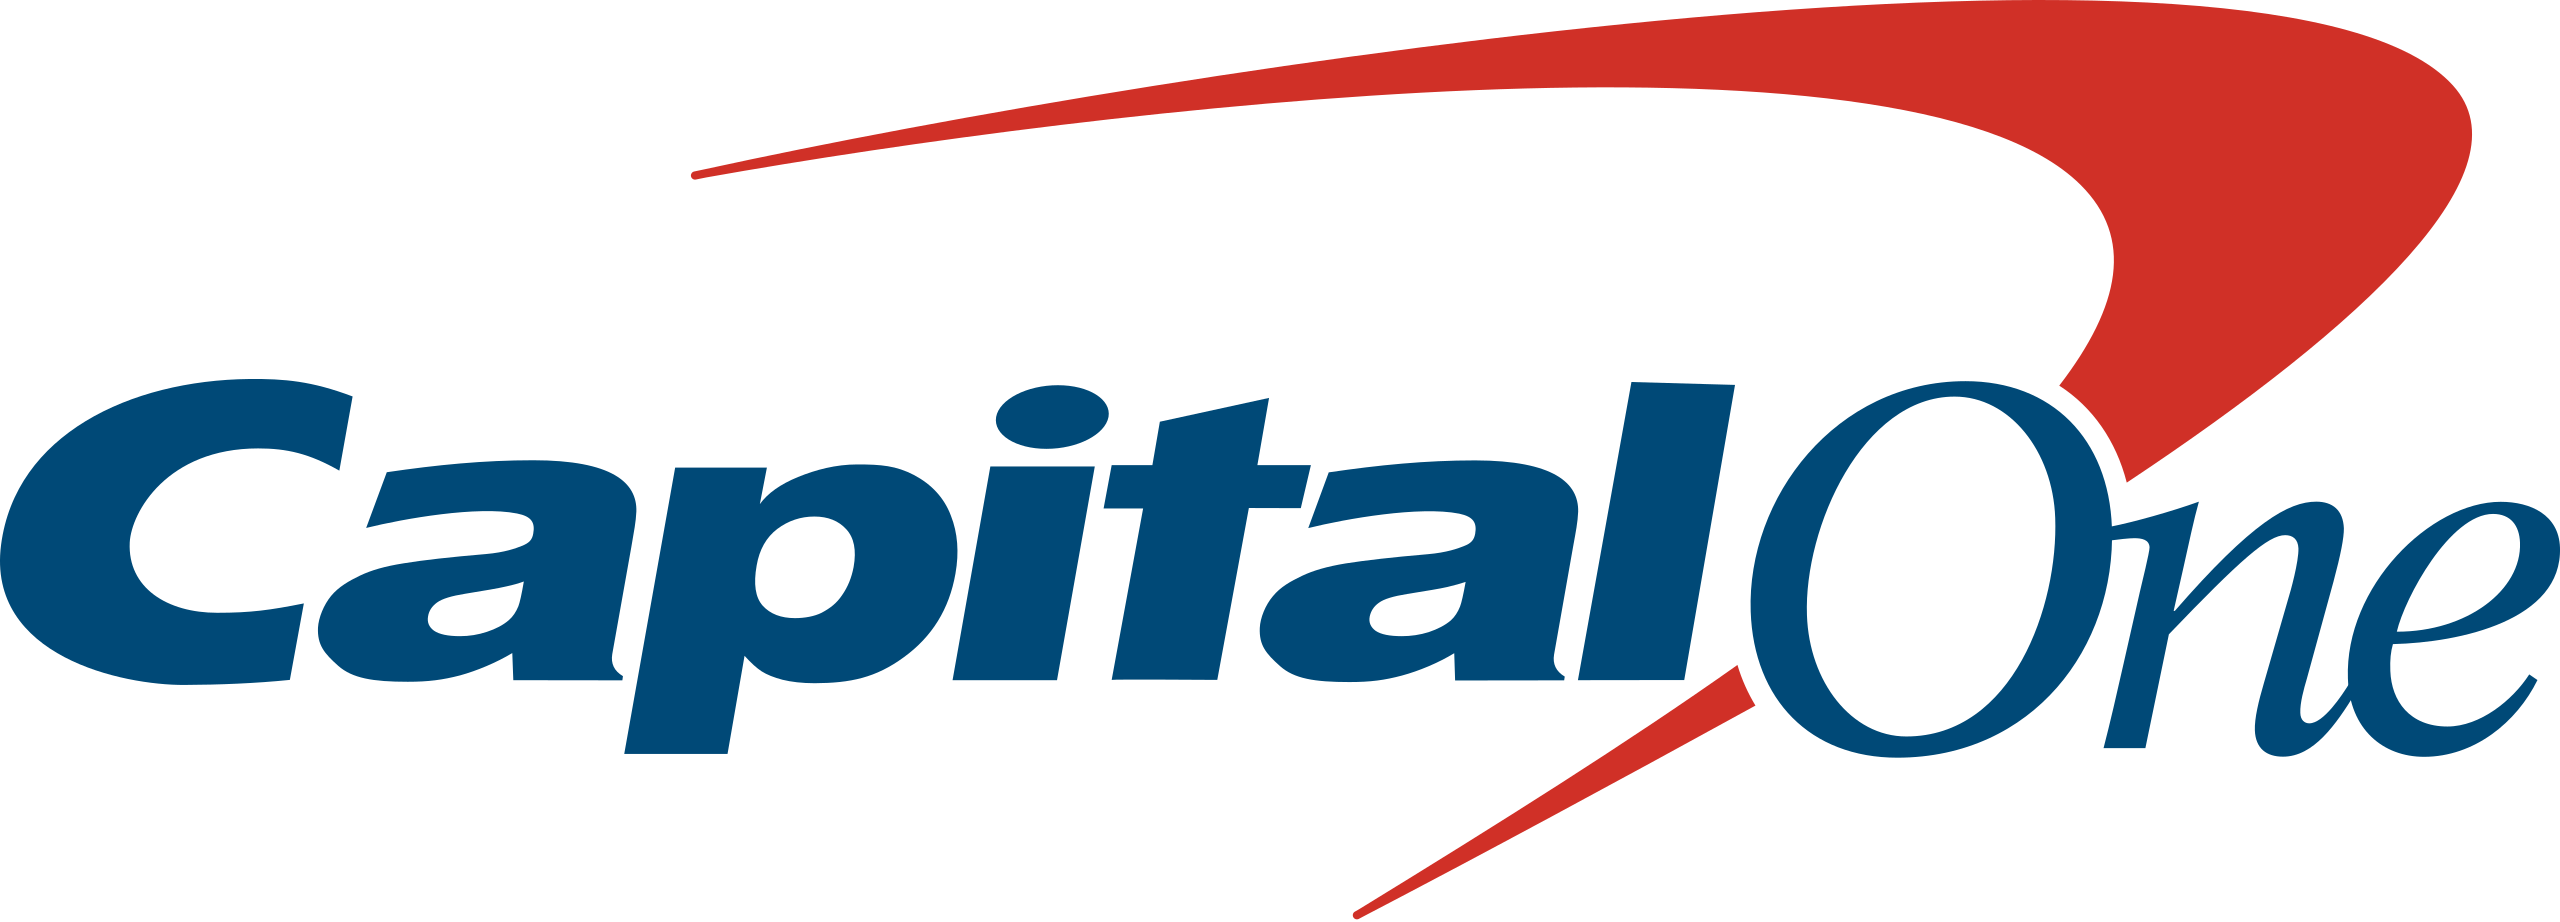 This is the Capital One business logo.